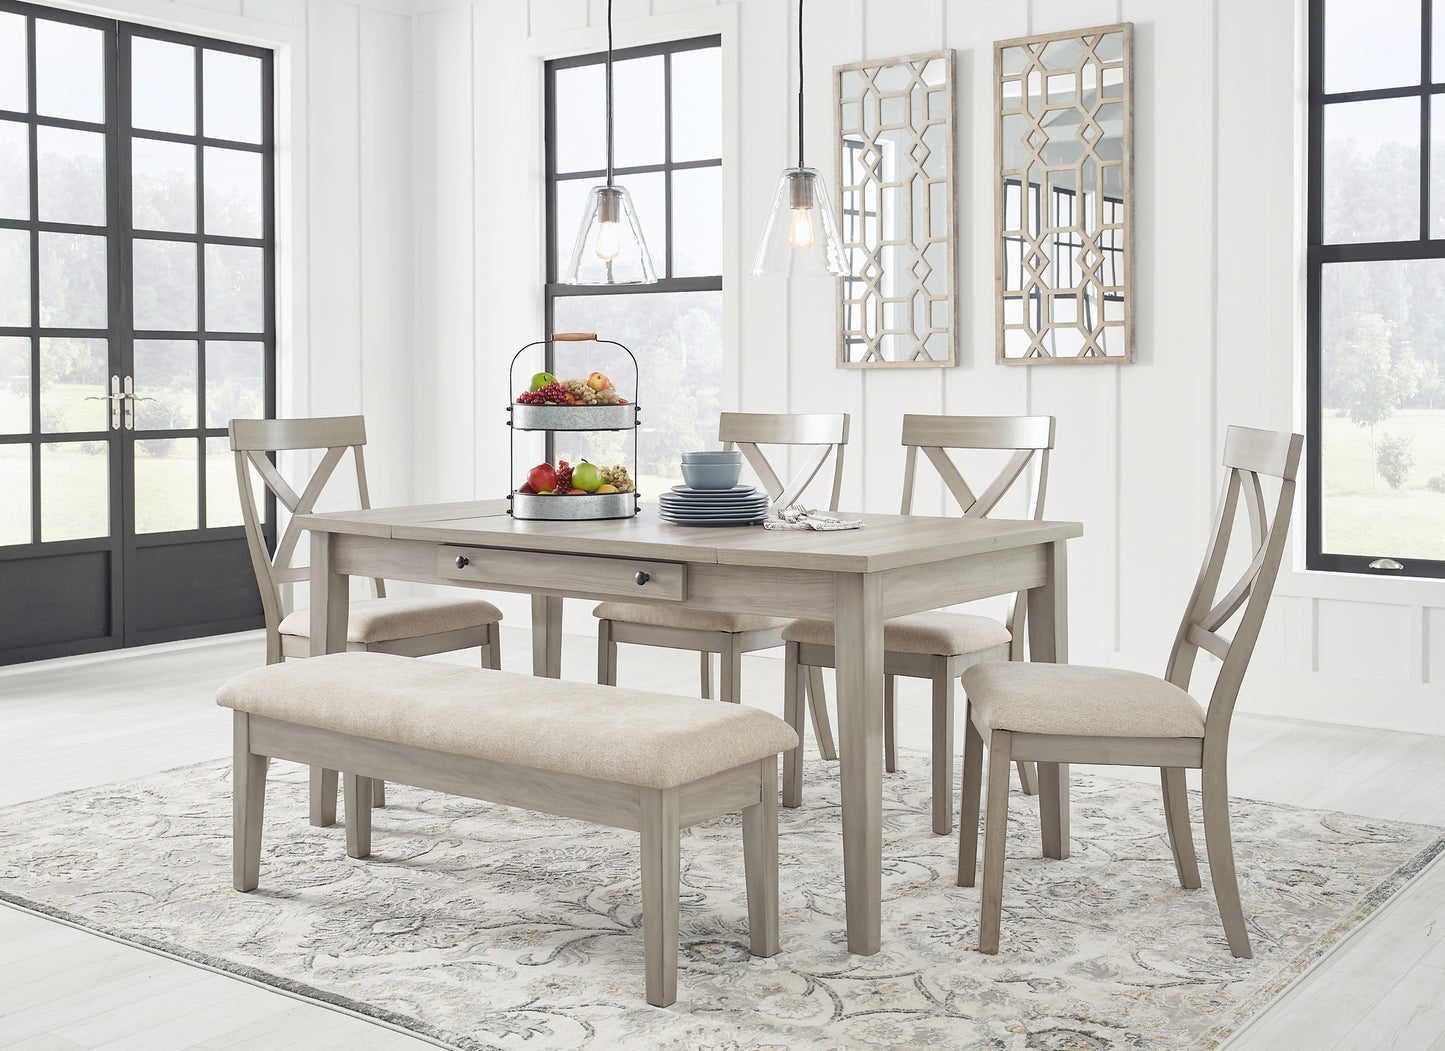 Parellen Dining Table and 4 Chairs and Bench Wilson Furniture (OH)  in Bridgeport, Ohio. Serving Bridgeport, Yorkville, Bellaire, & Avondale